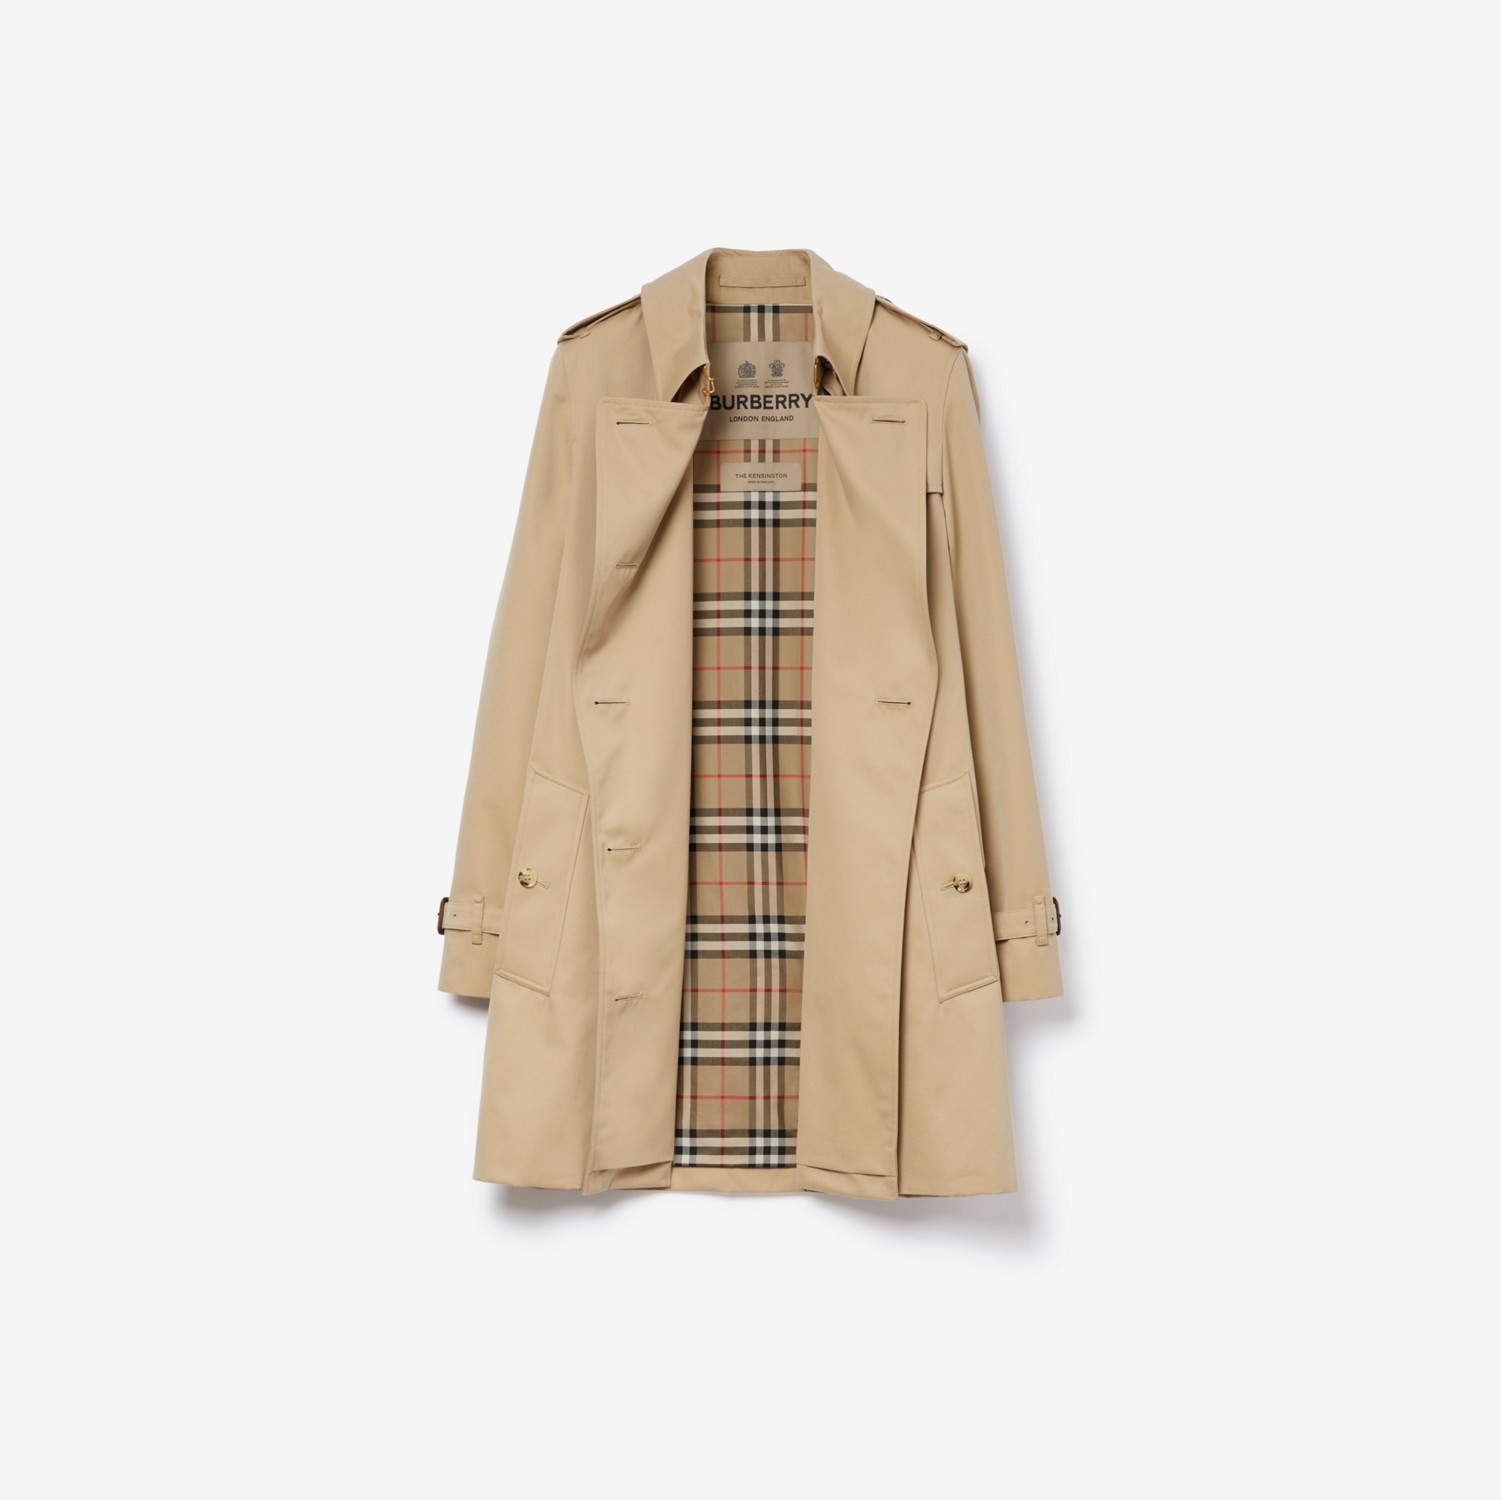 Kensington - Trench coat Heritage curto (Mel) - Mulheres | Burberry® oficial